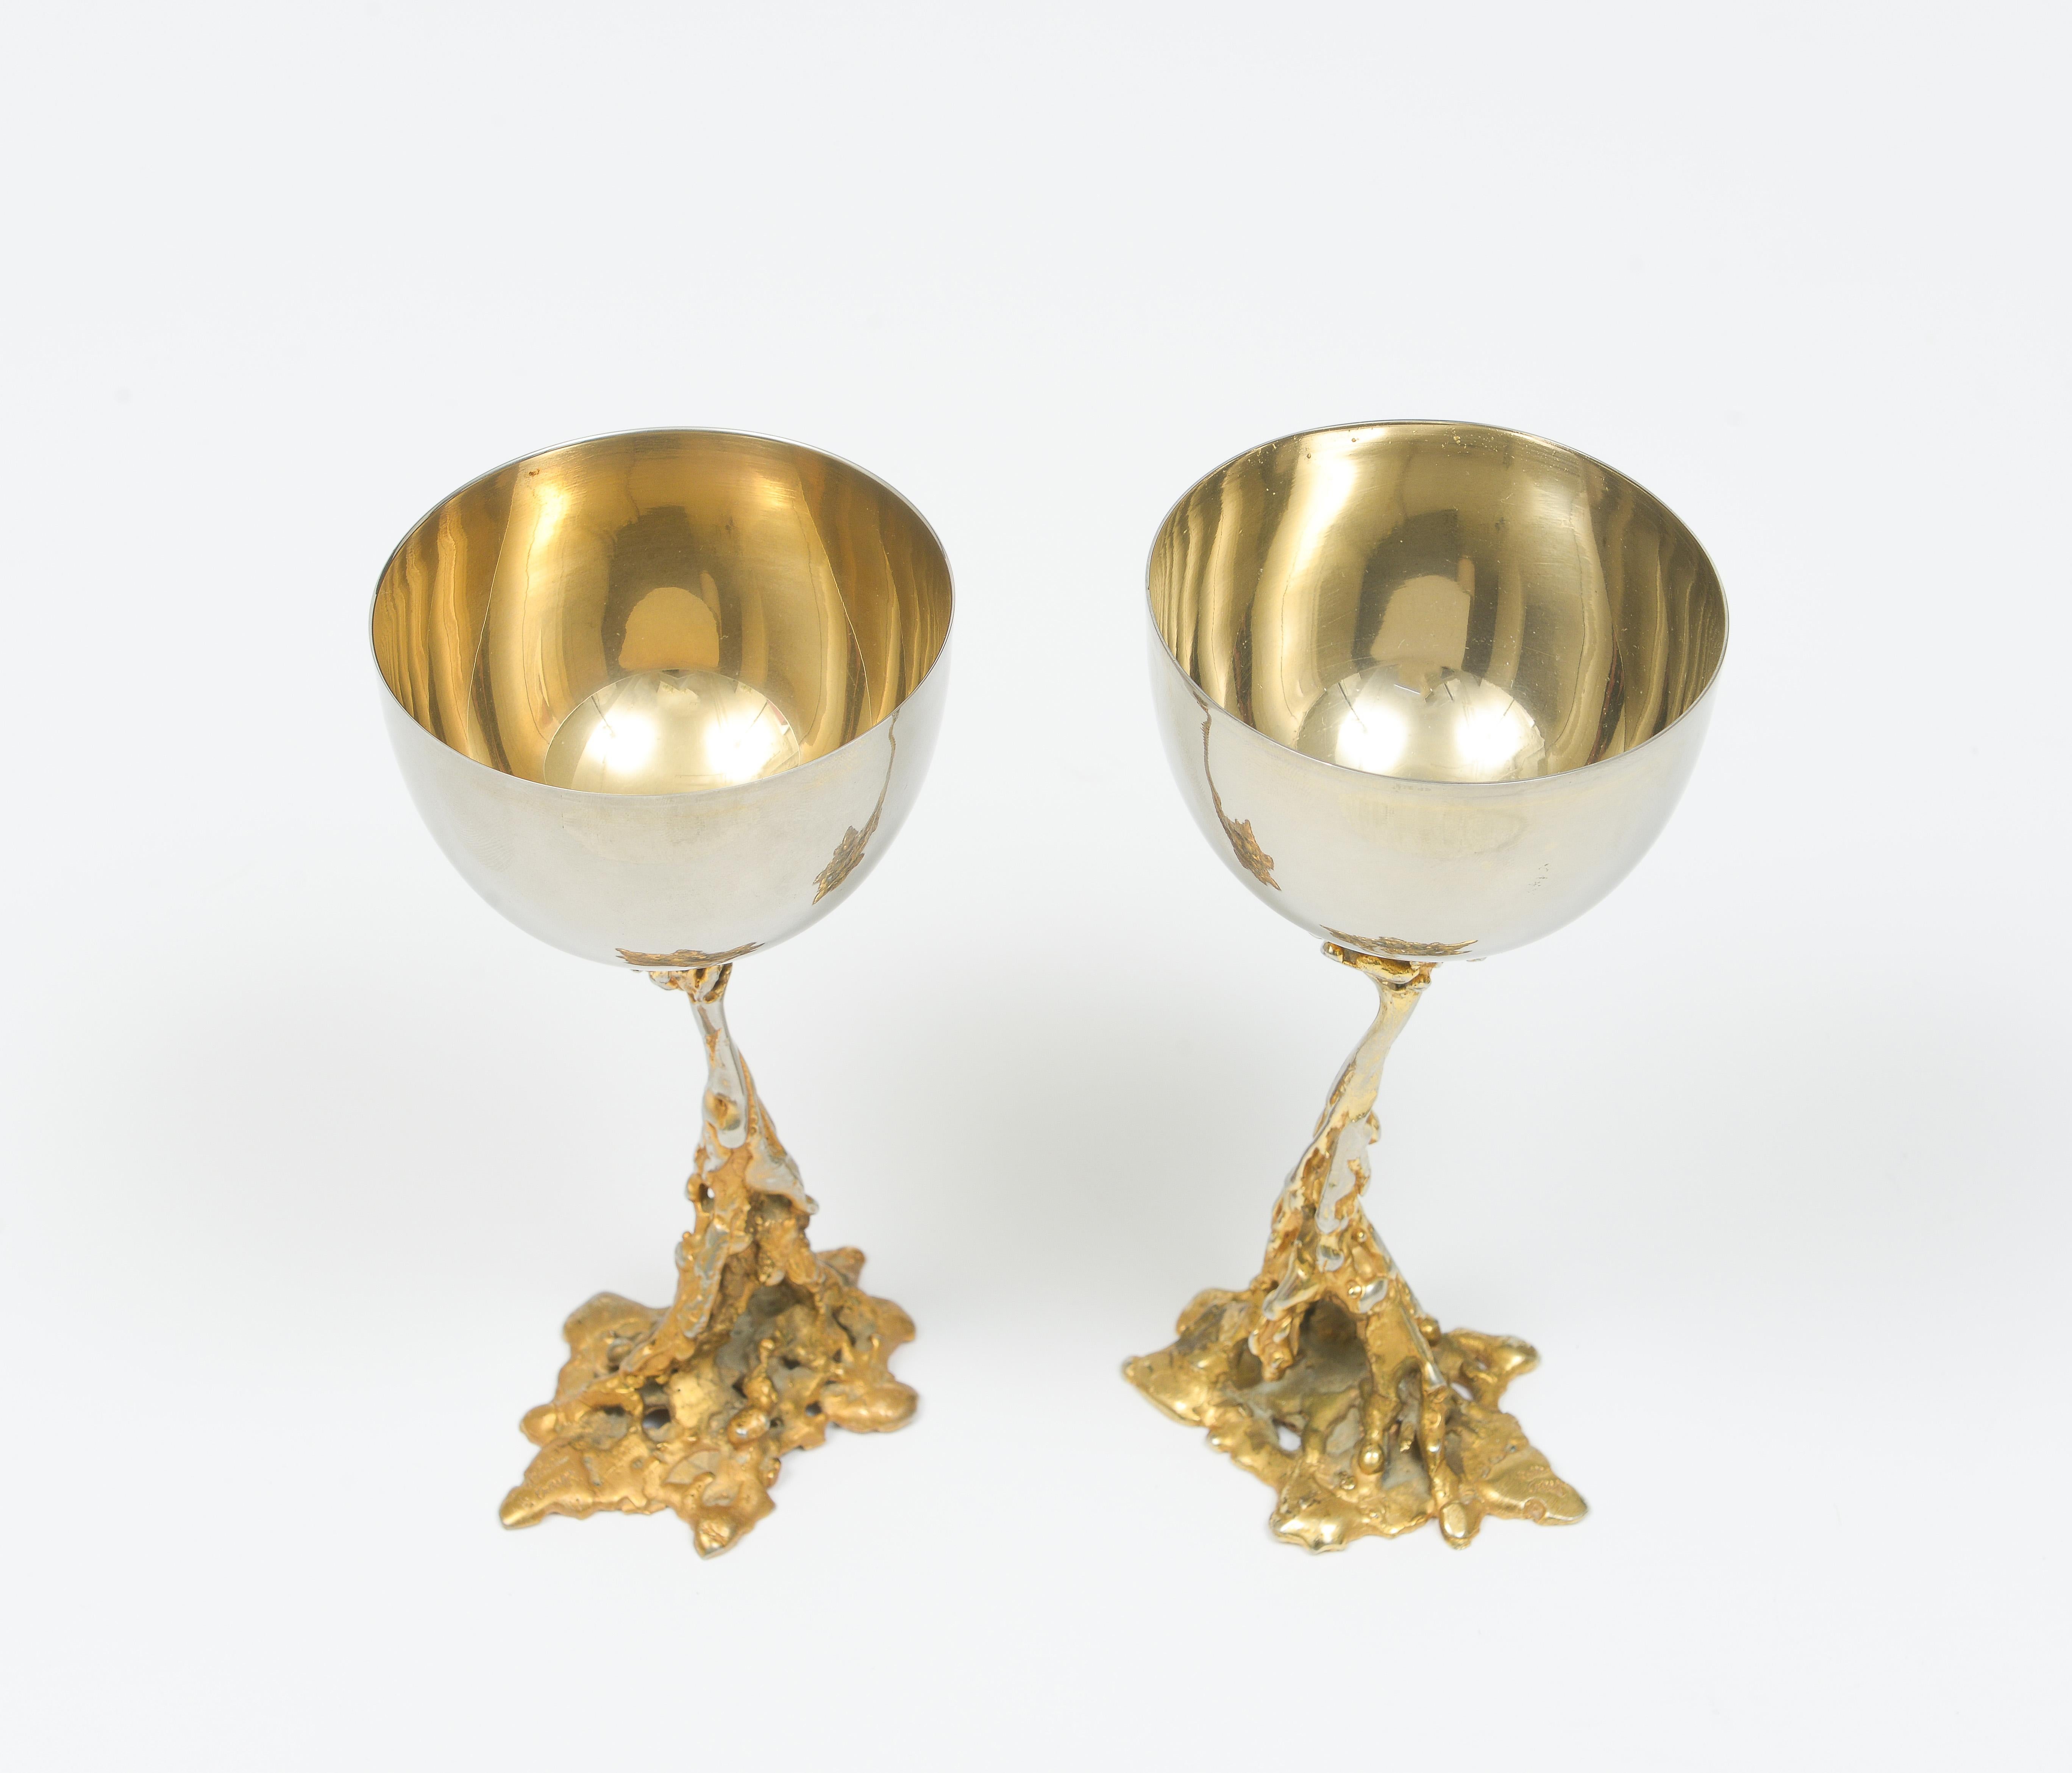 Gabriella Crespi signed brass chalices 1970 midcentury Italian

Dimensions: 3.5 in diameter, 7 in height, base 3 in.

About Gabriella Crespi (Designer)
Bronze discs that open up like clamshells for storage and fold back in to become side